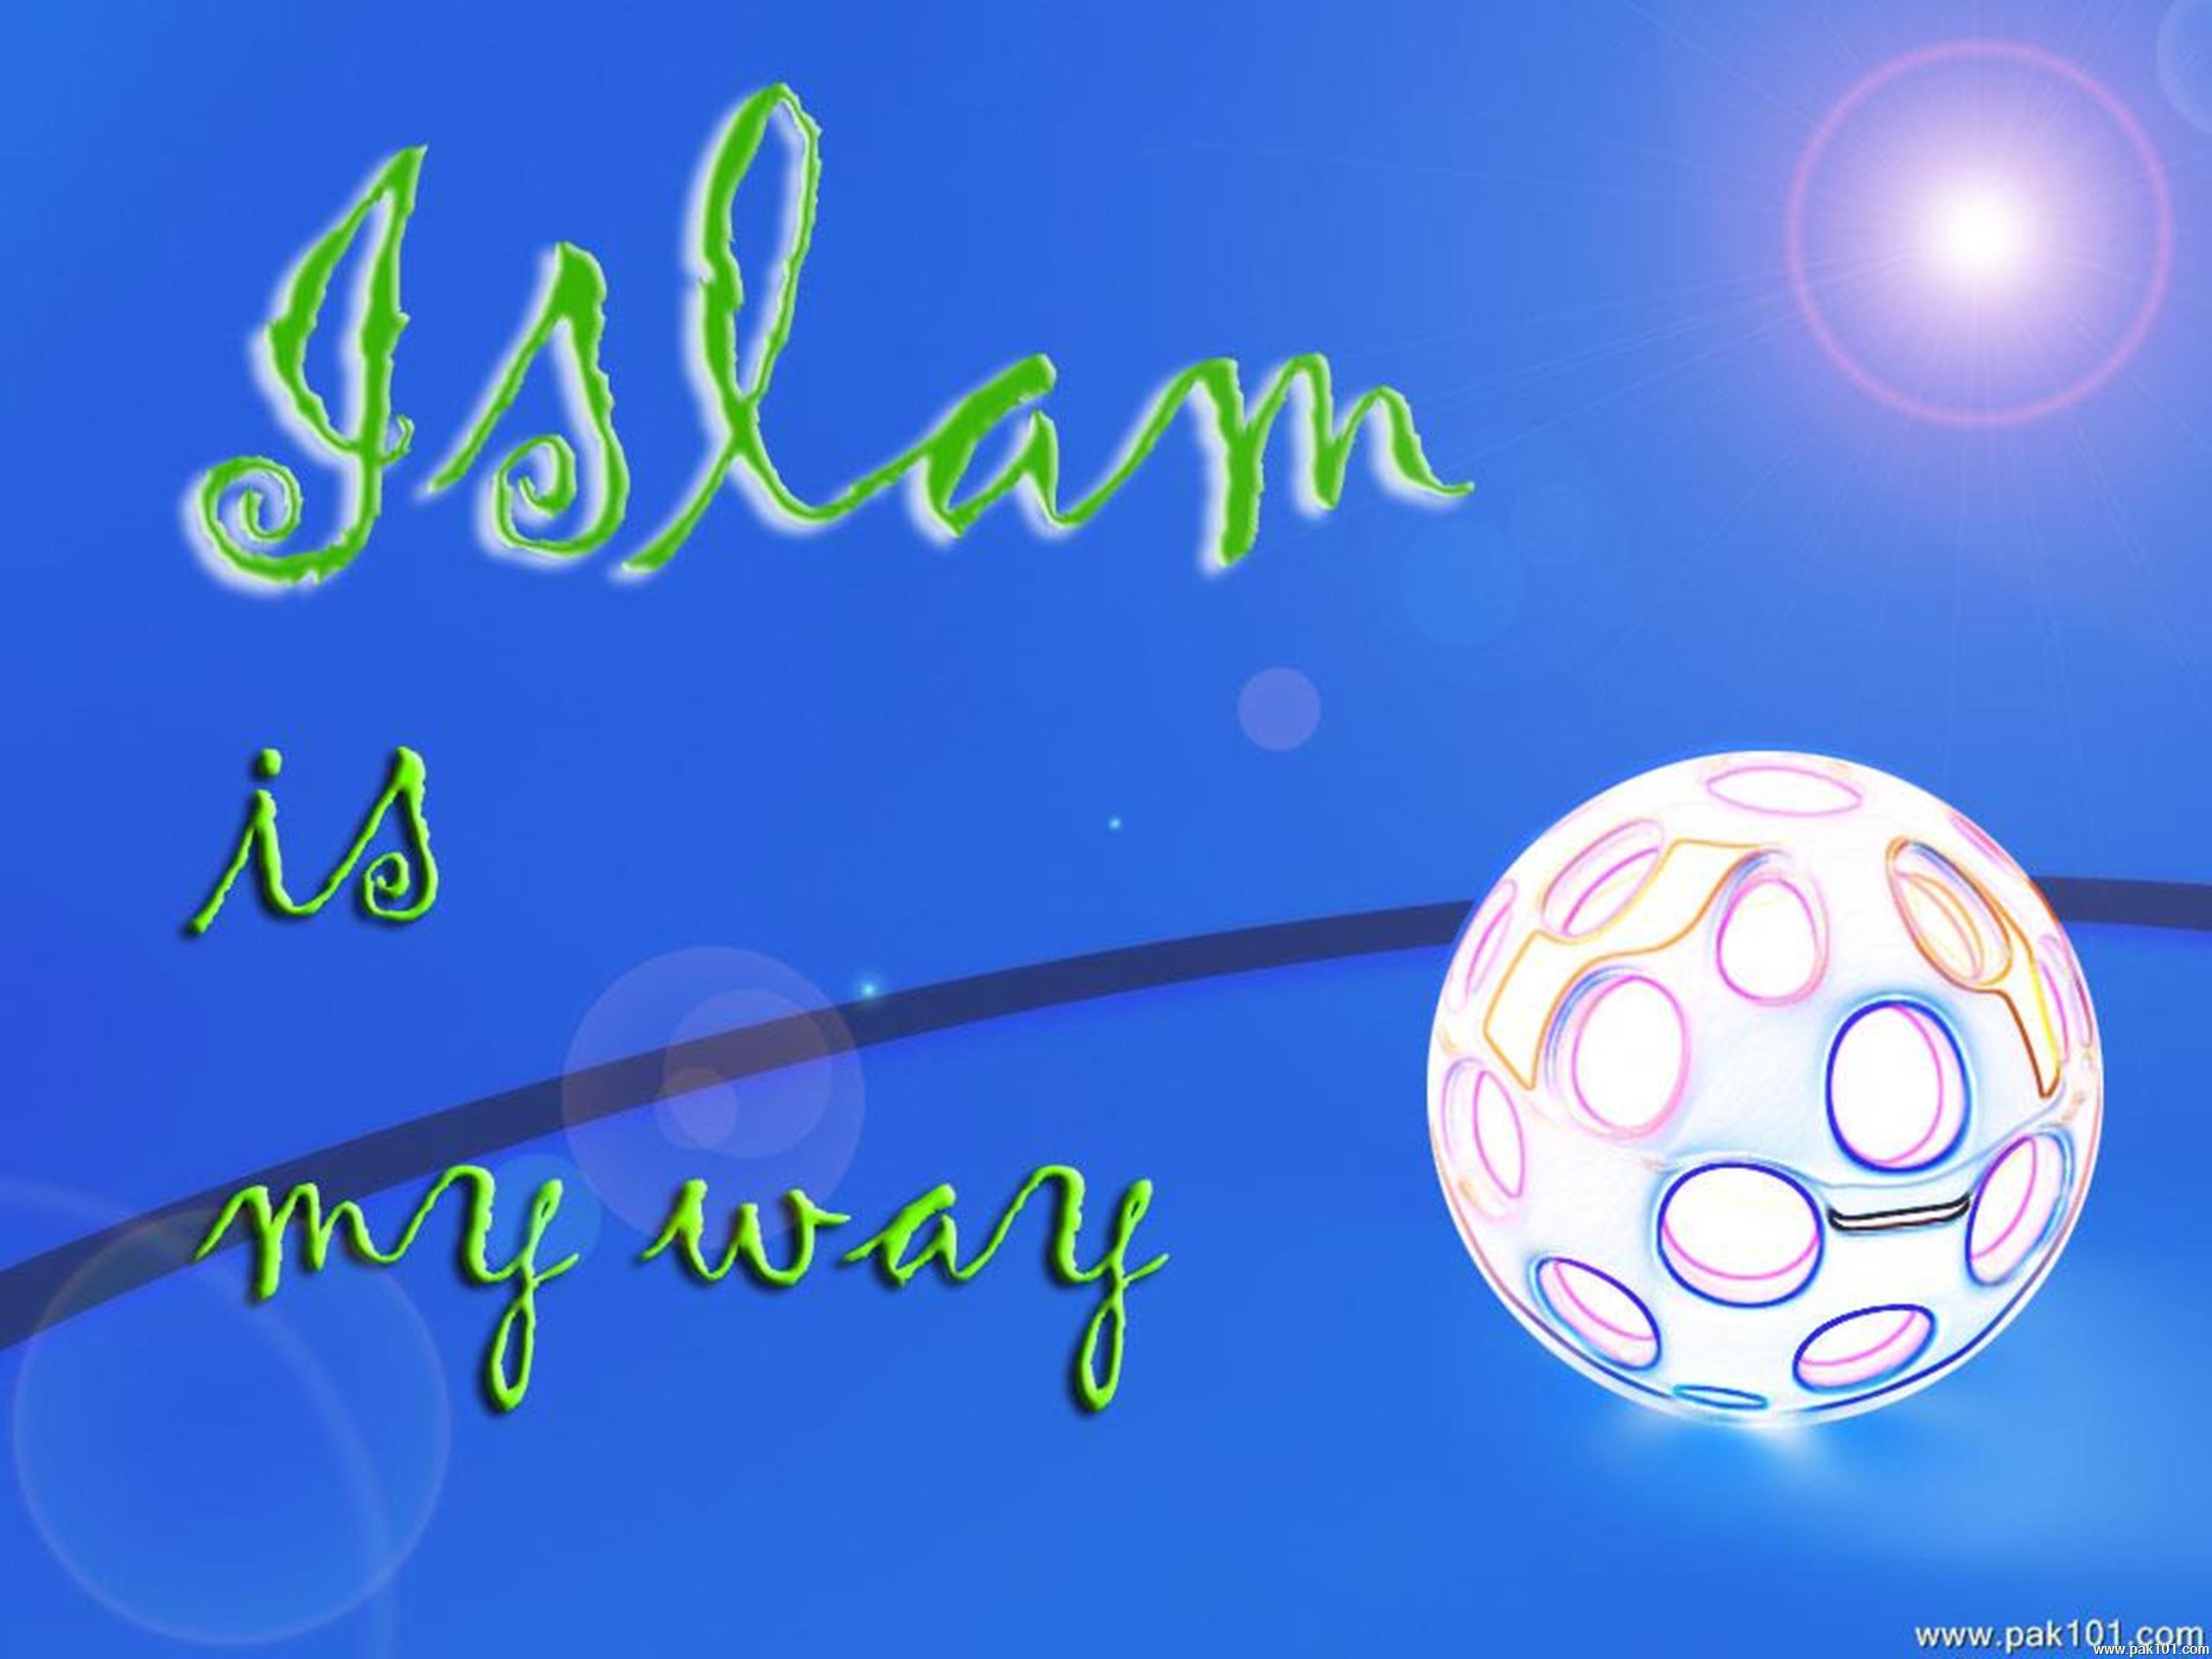 Wallpaper > Islamic > Islam Is My Way high quality! Free download